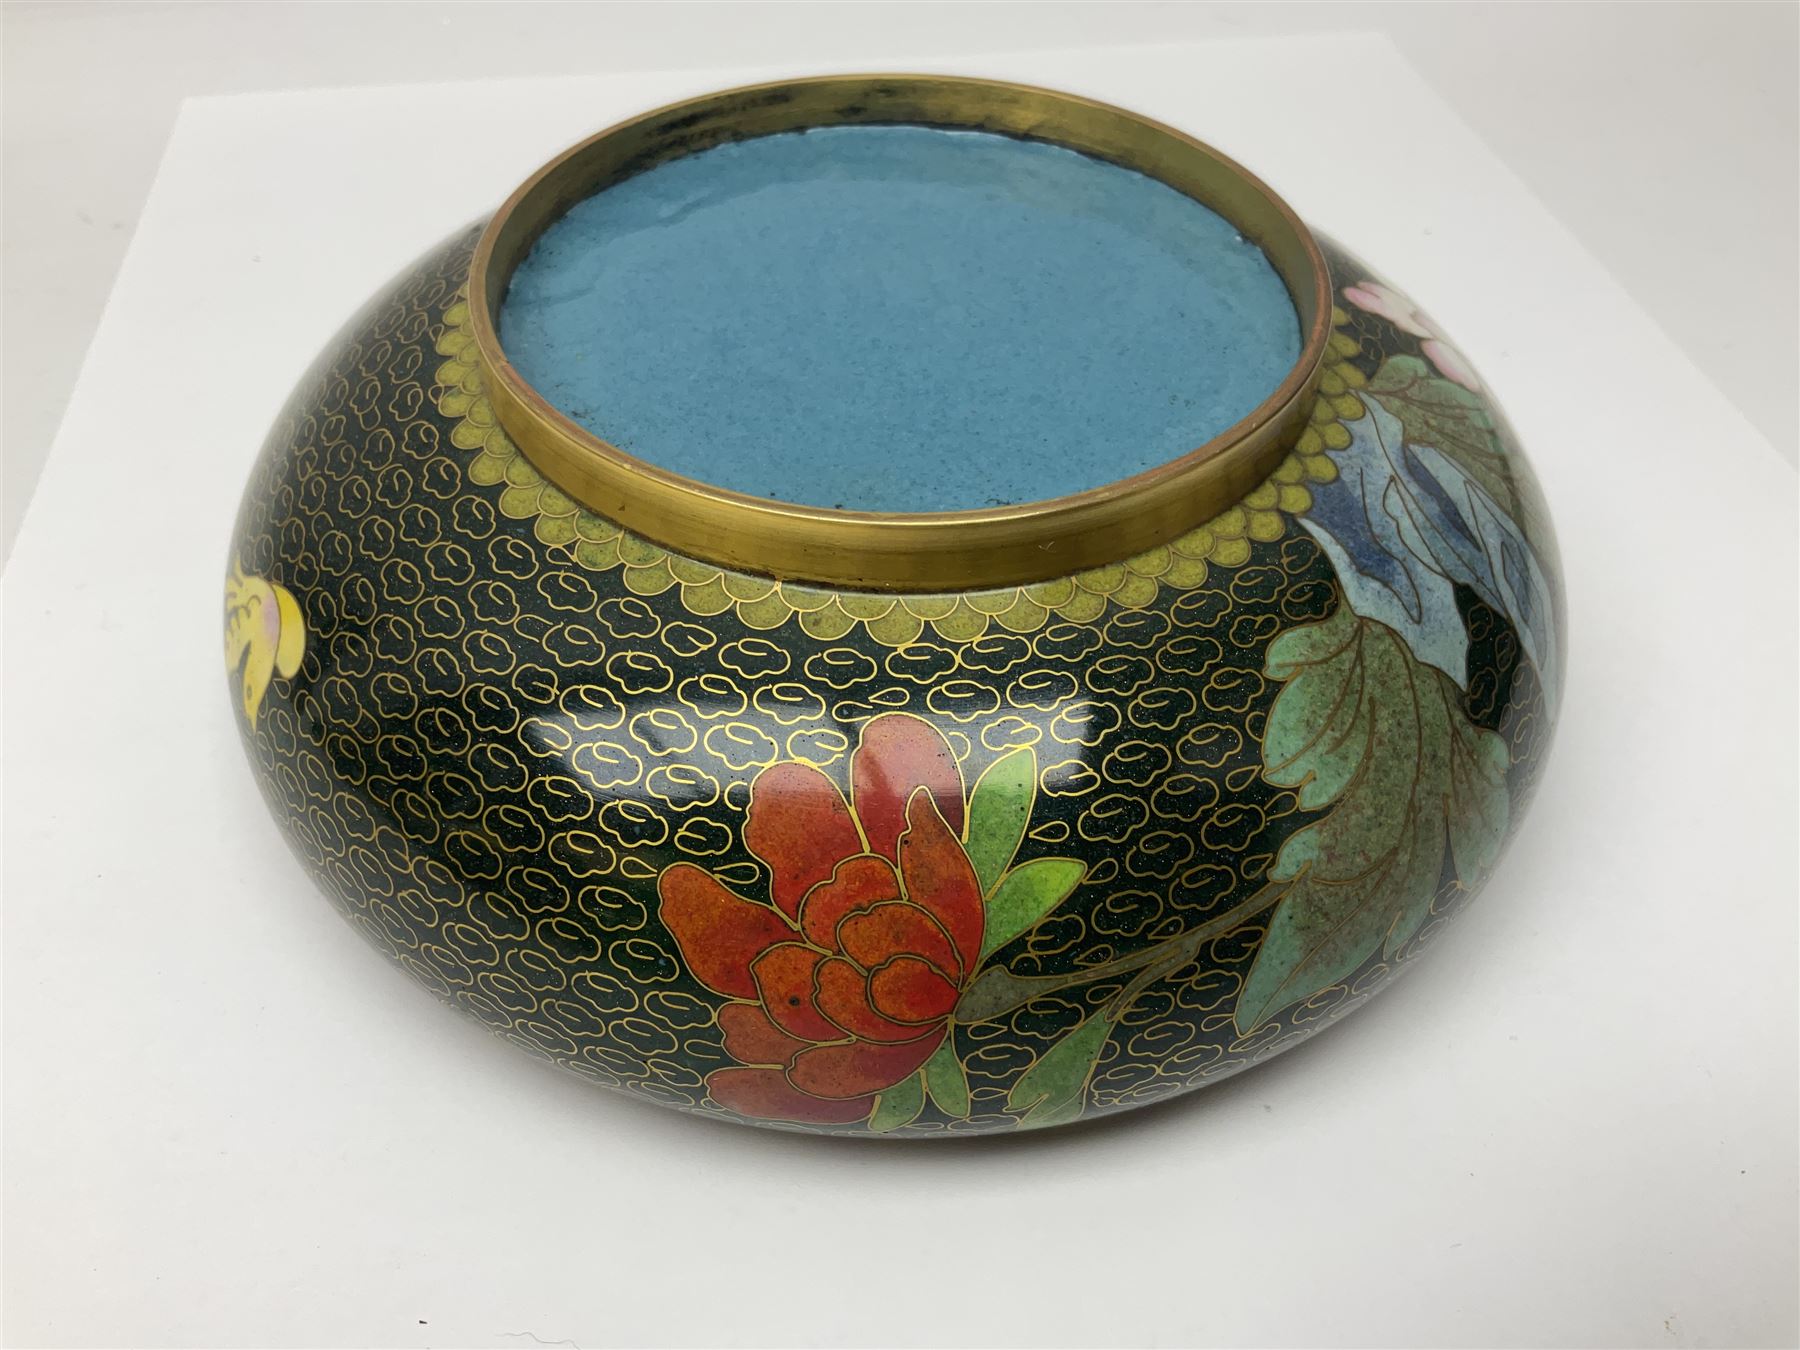 Pair of modern cloisonne ginger jars having floral decoration with a green ground - Image 10 of 13